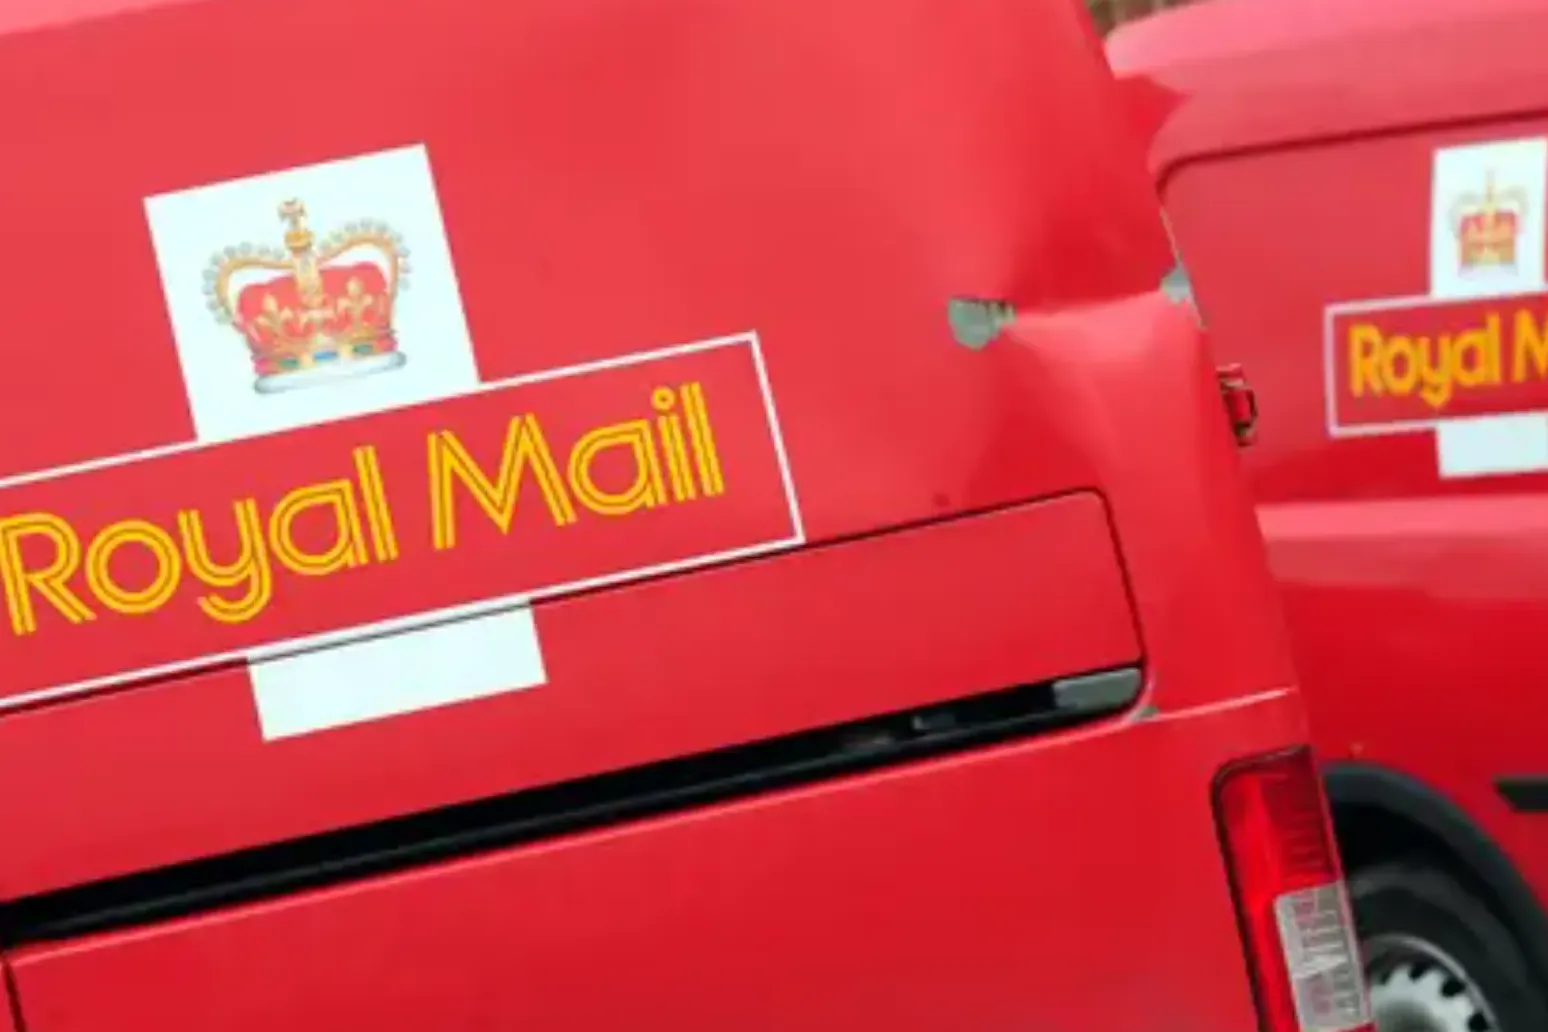 Fresh strikes in Royal Mail dispute over pay and conditions 